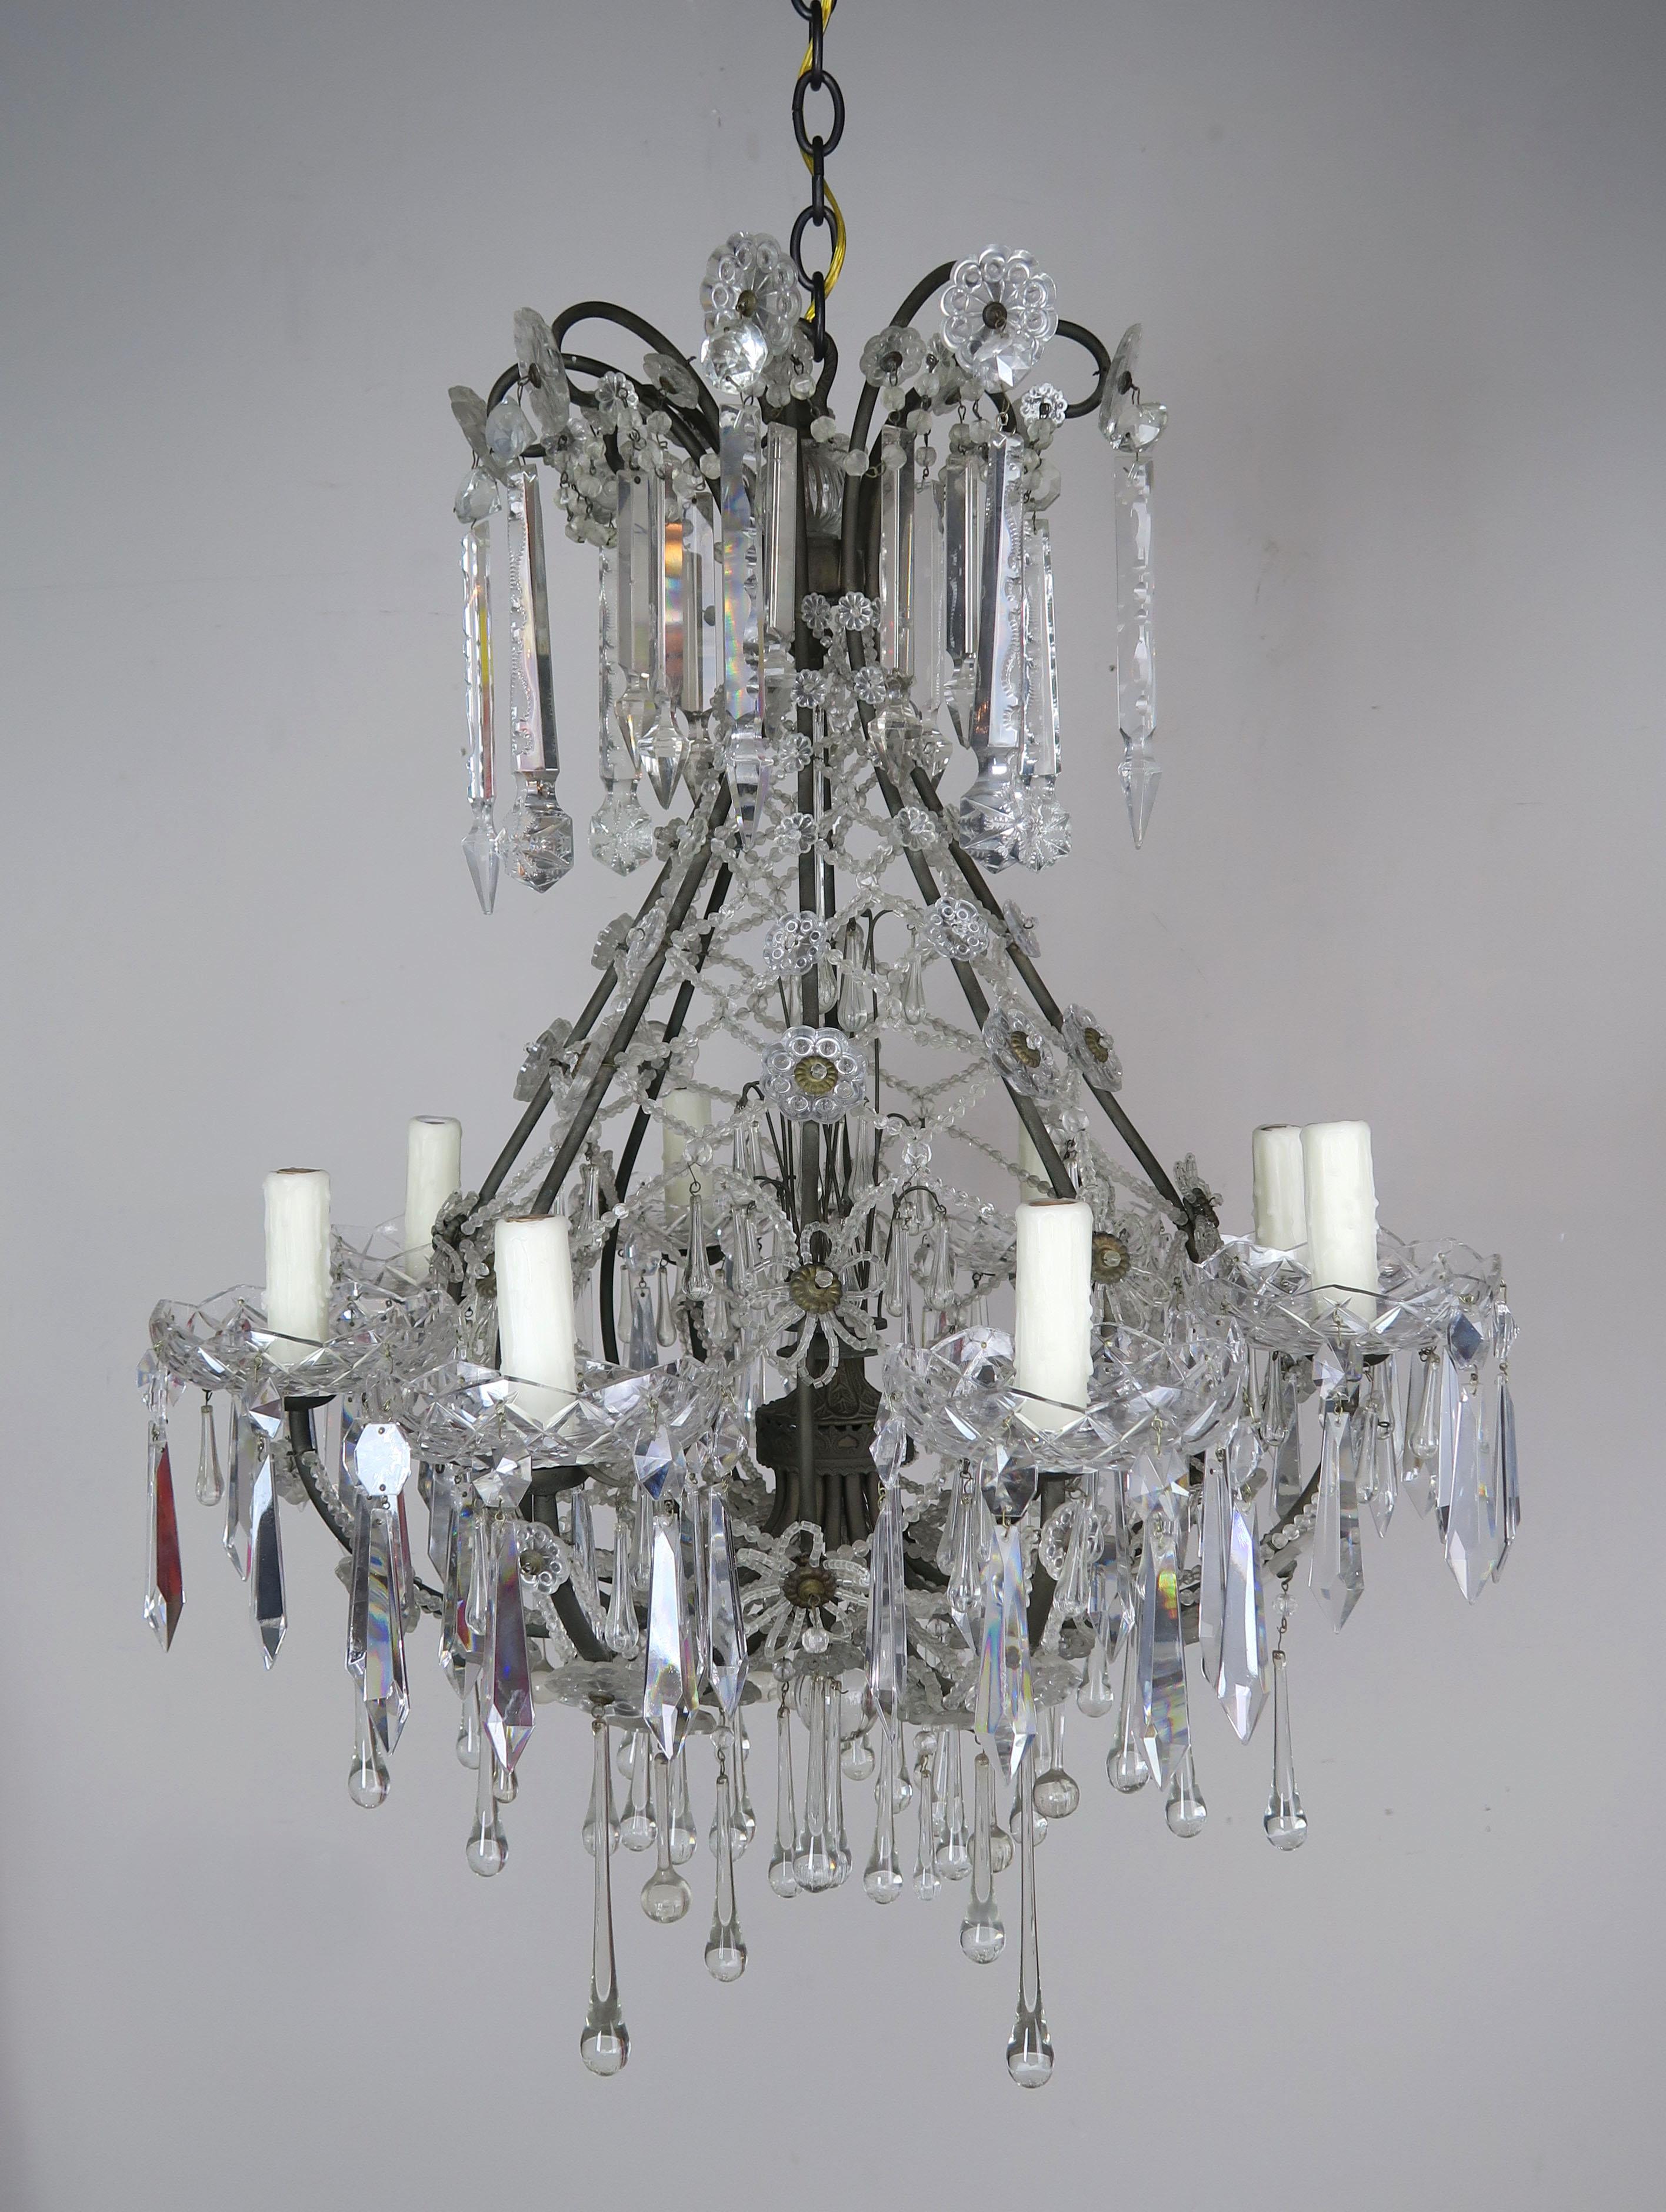 French Louis XV style 8-light beaded crystal chandelier. The fixture is adorned with unique hand cut crystal spheres and drops throughout. An intricate lattice work design is made with tiny beads and separated with handmade beaded flower accents.